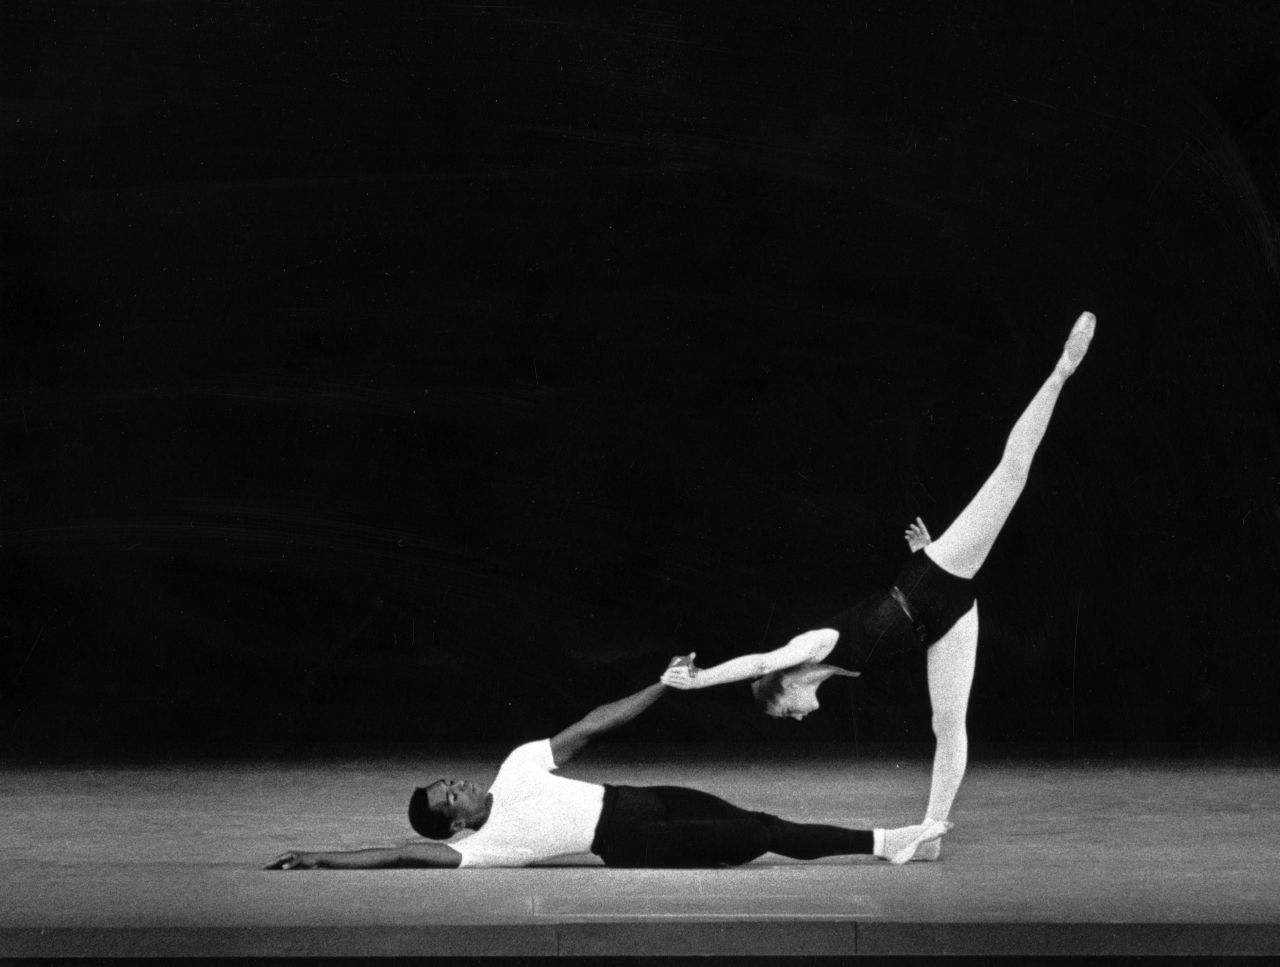 Mitchell and Suzanne Farrell dance in Balanchine's groundbreaking modernist ballet "Agon" in 1963.